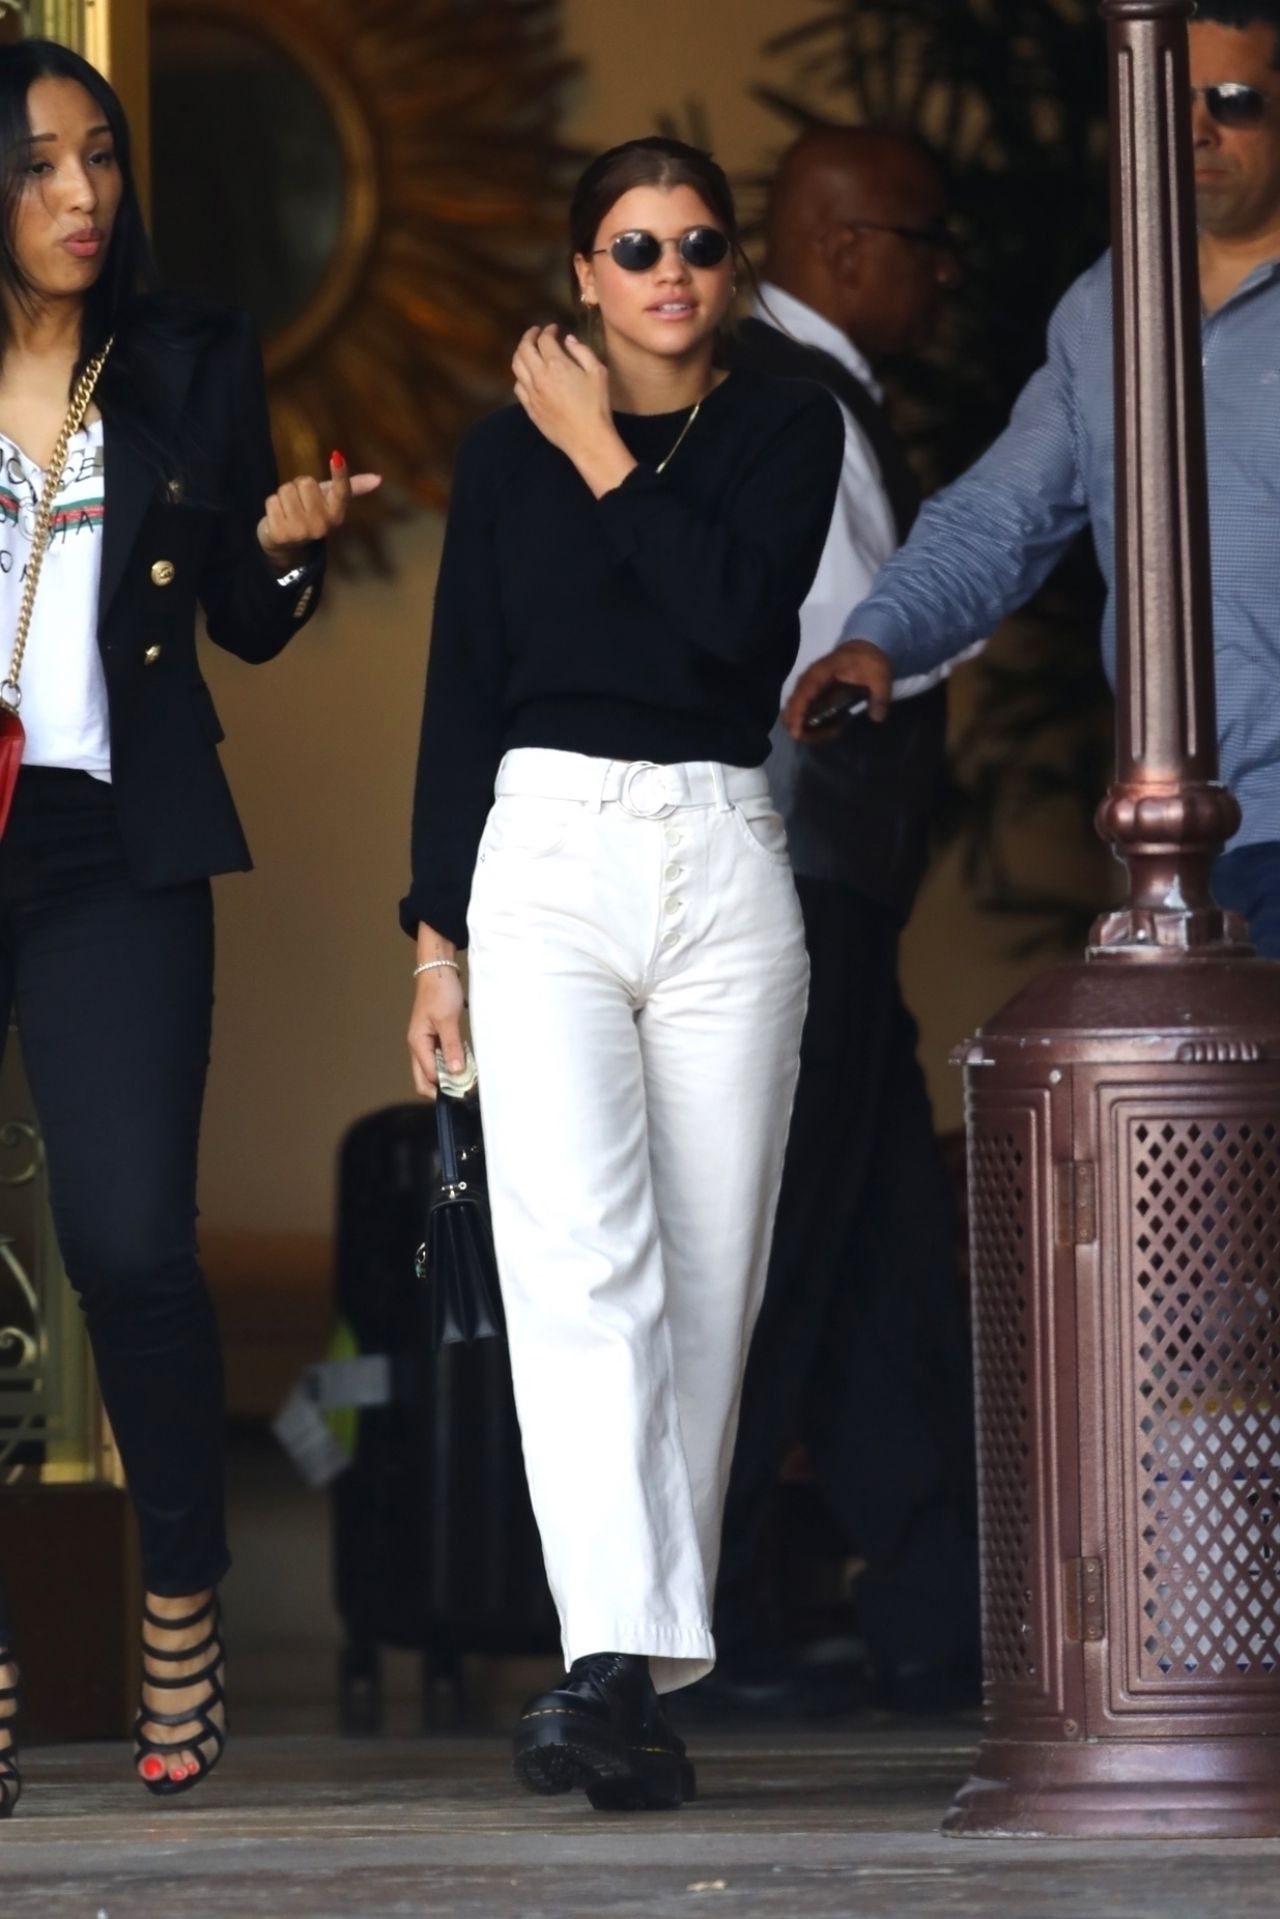 Sofia Richie at the Montage Hotel in Beverly Hills 04/02/2018 • CelebMafia